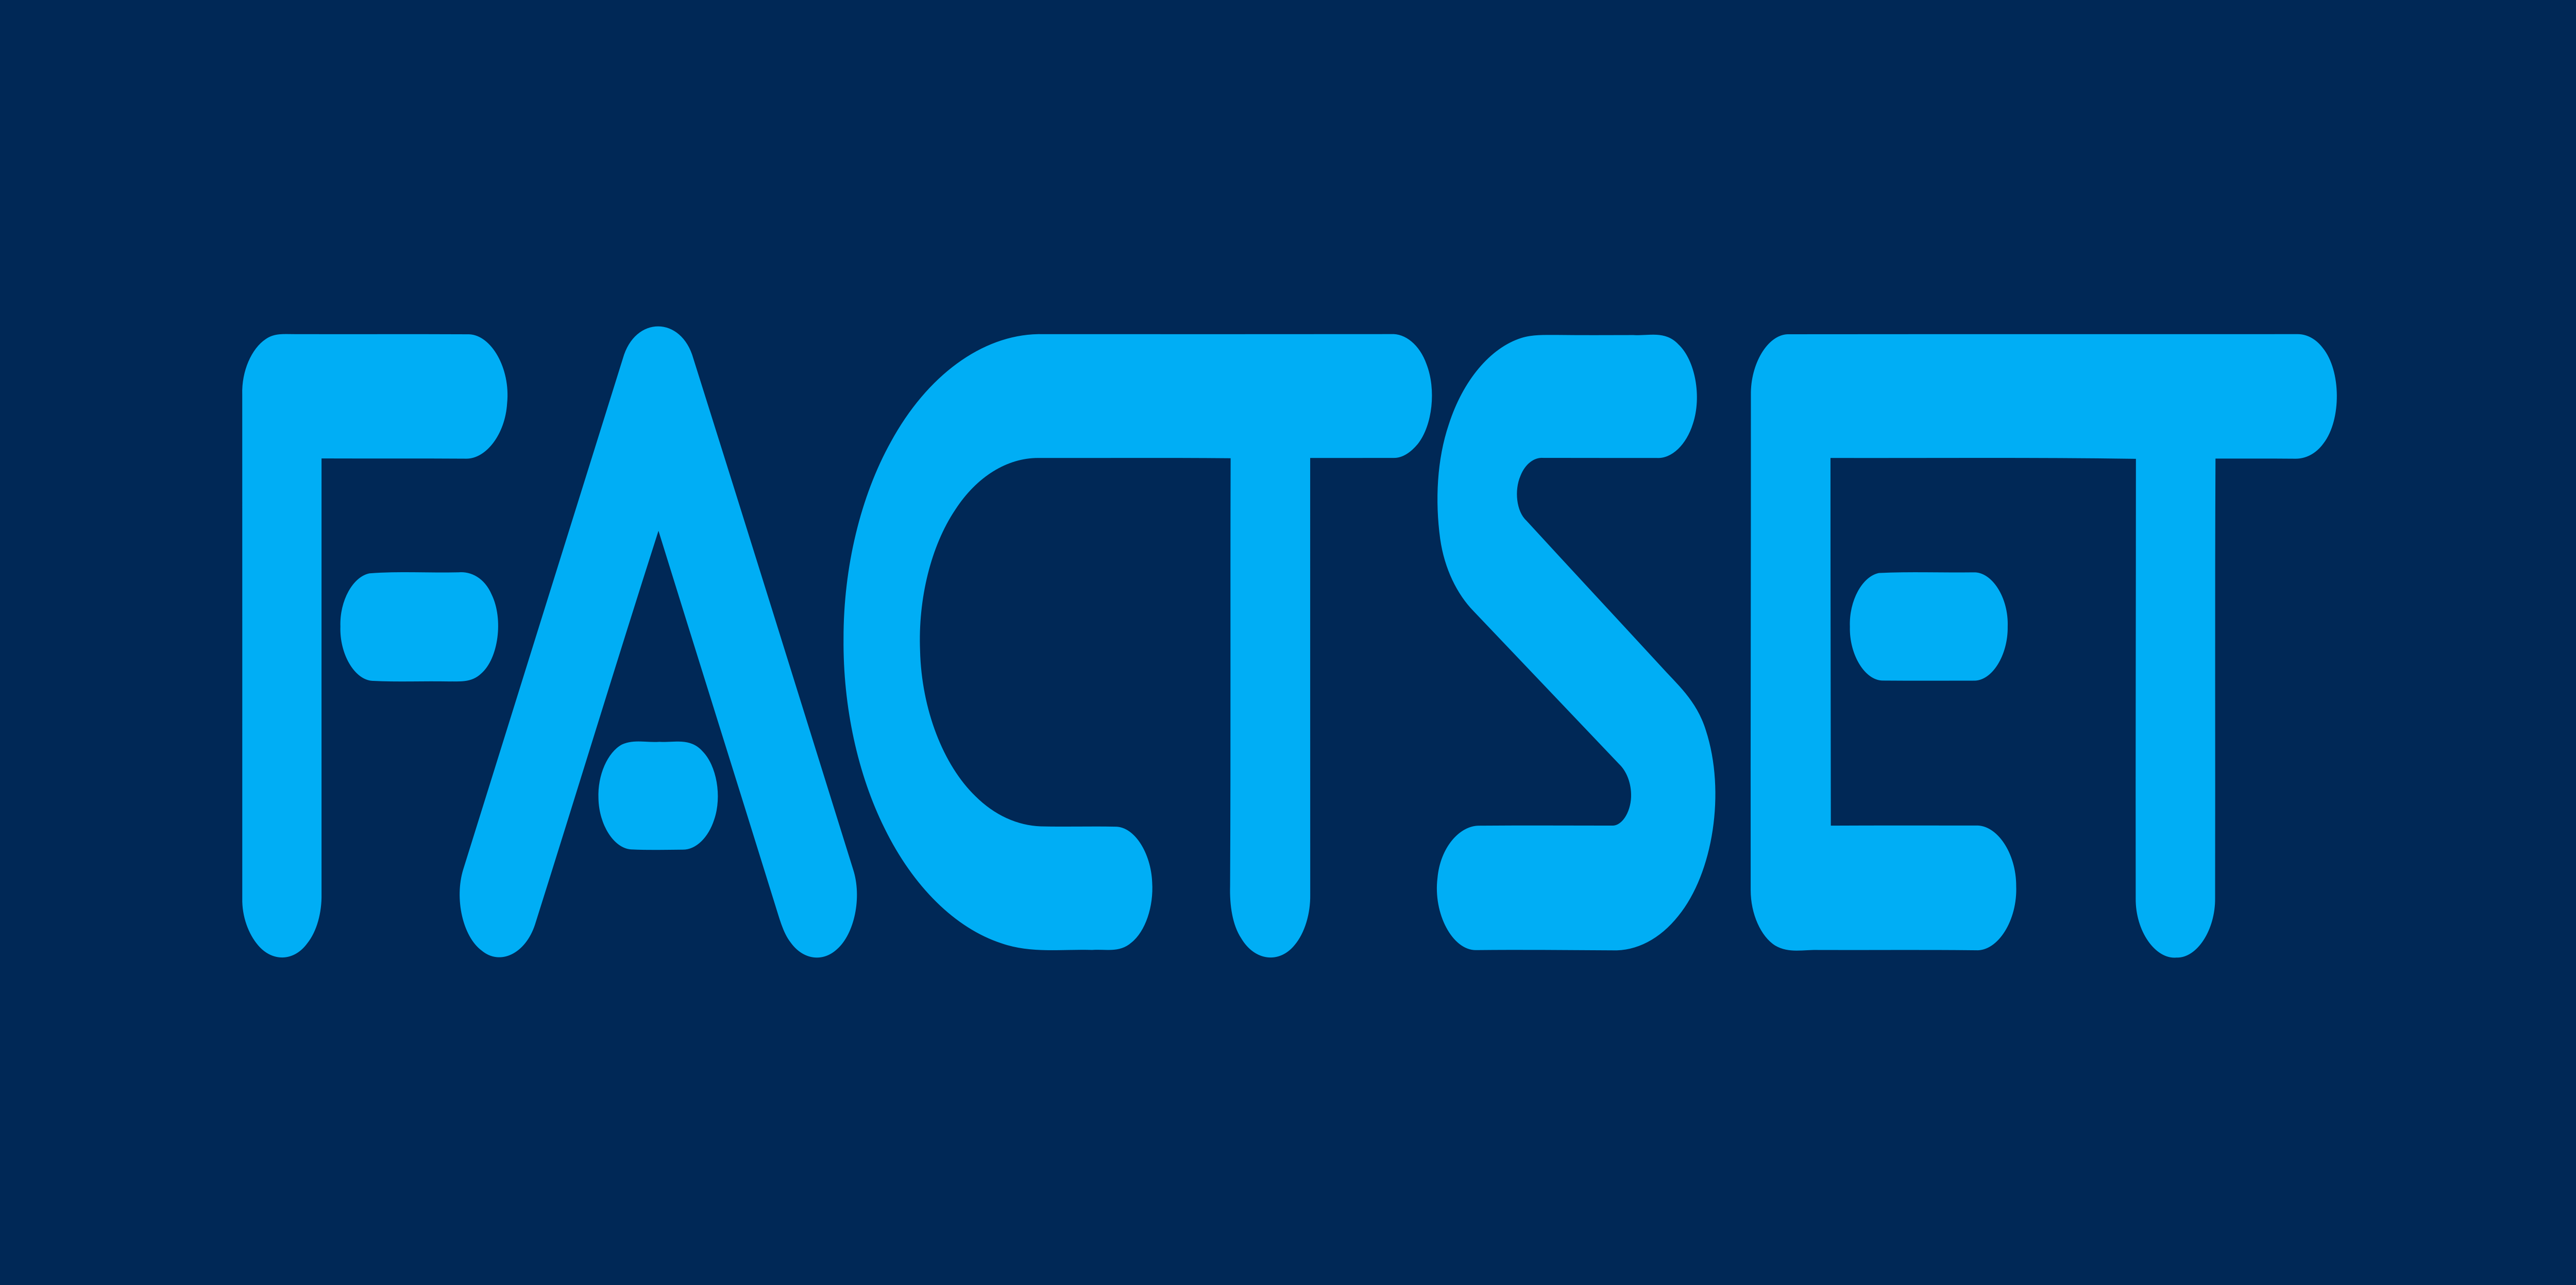 factset research systems inc